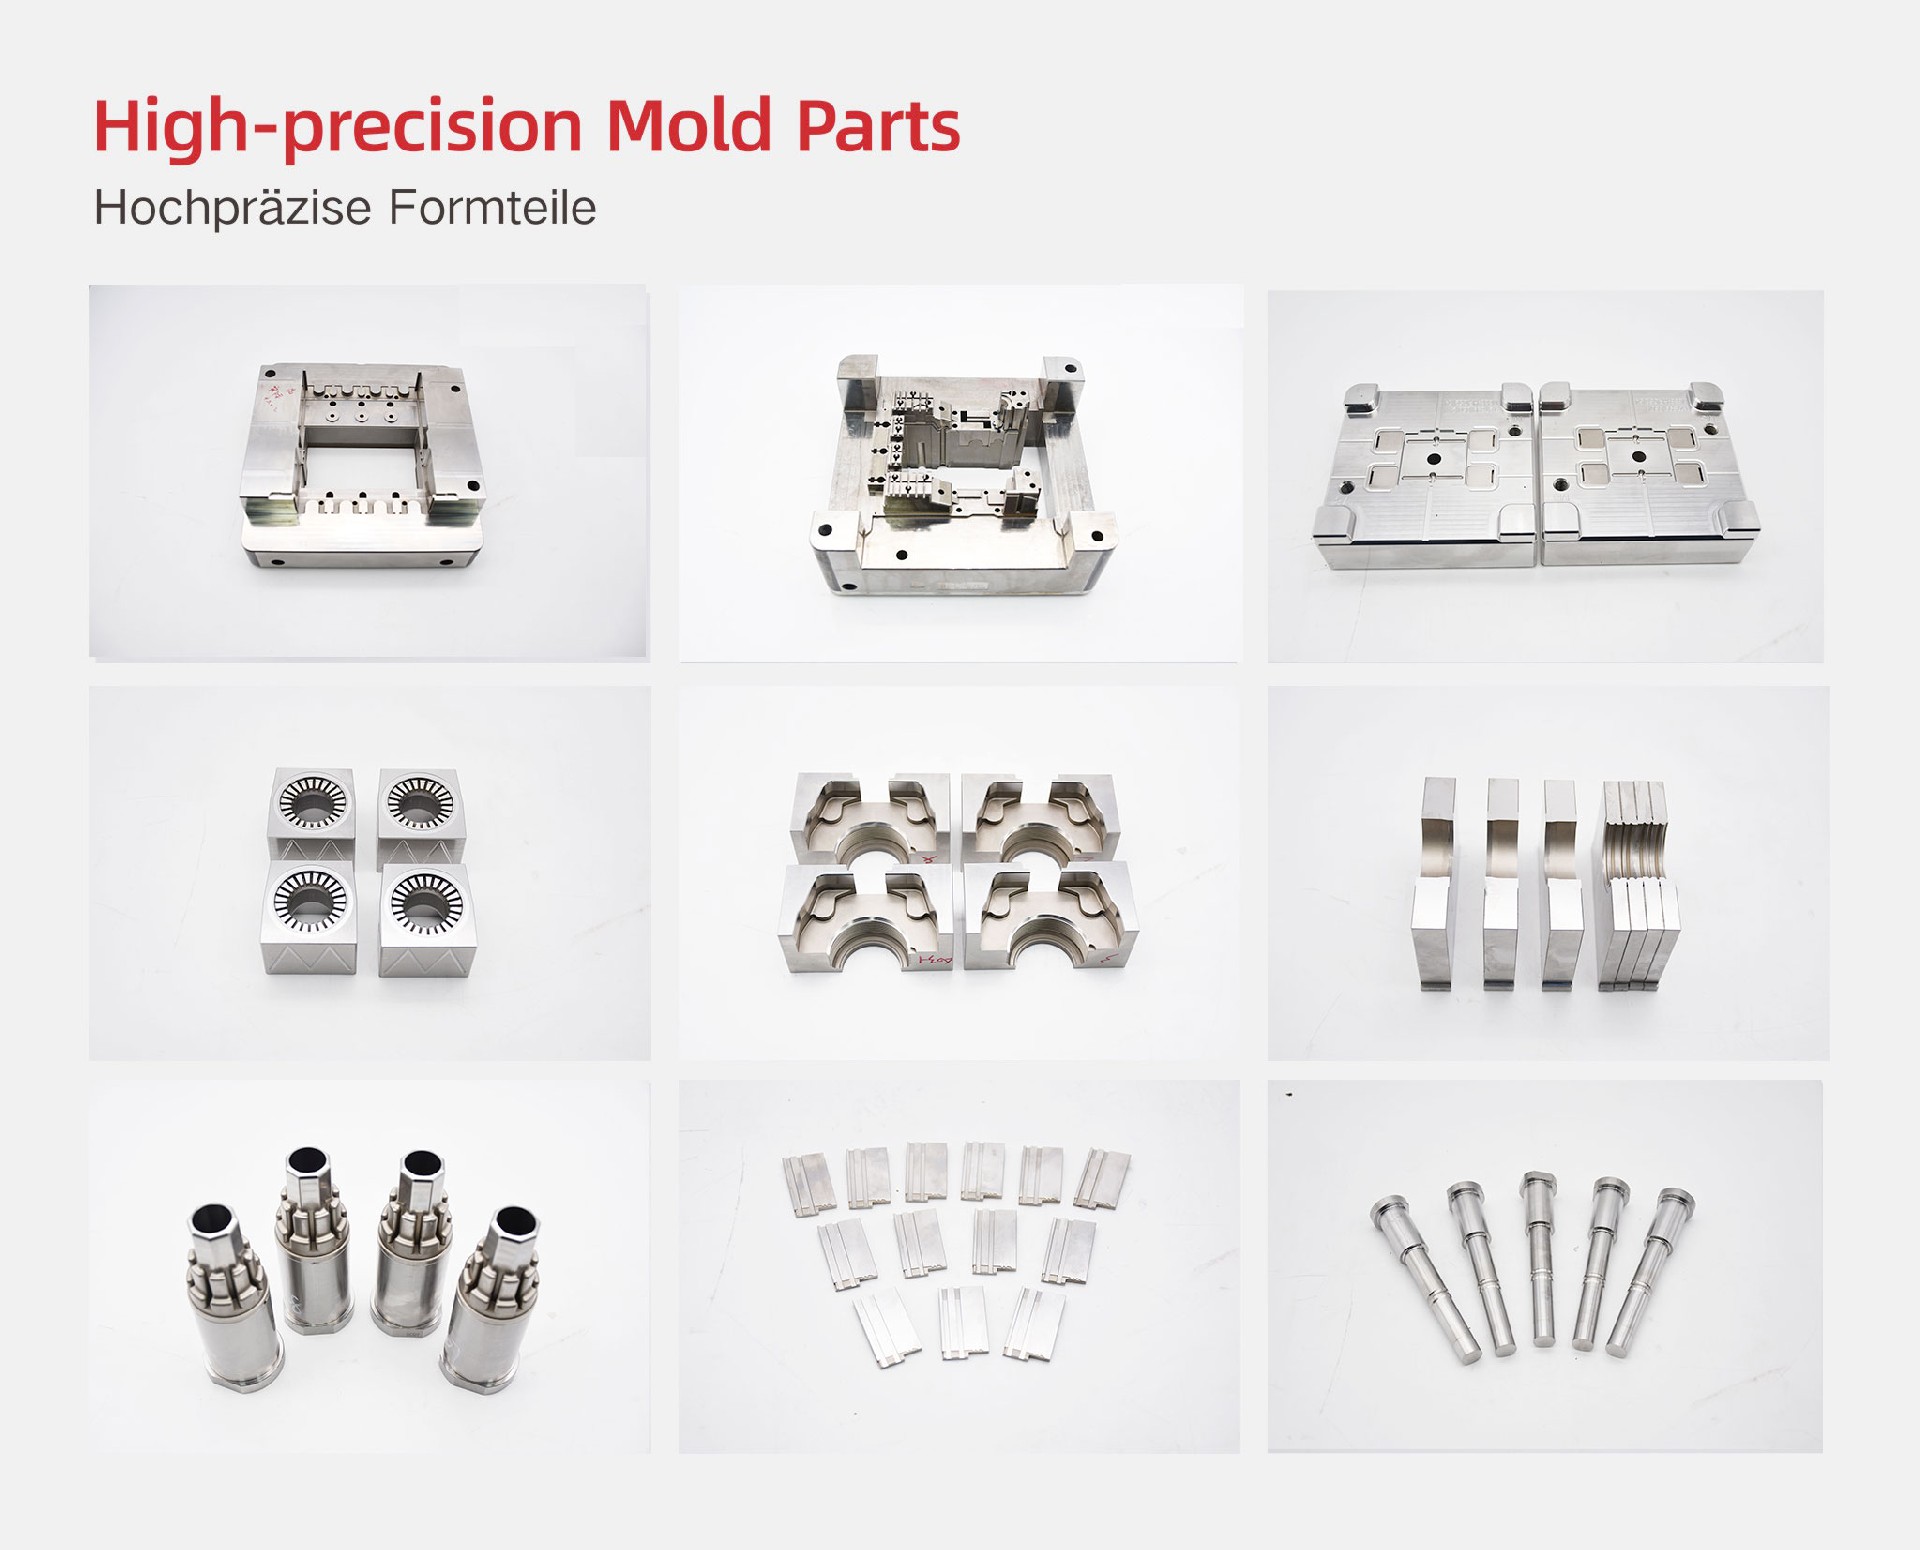 What is the purpose of injection moulding?